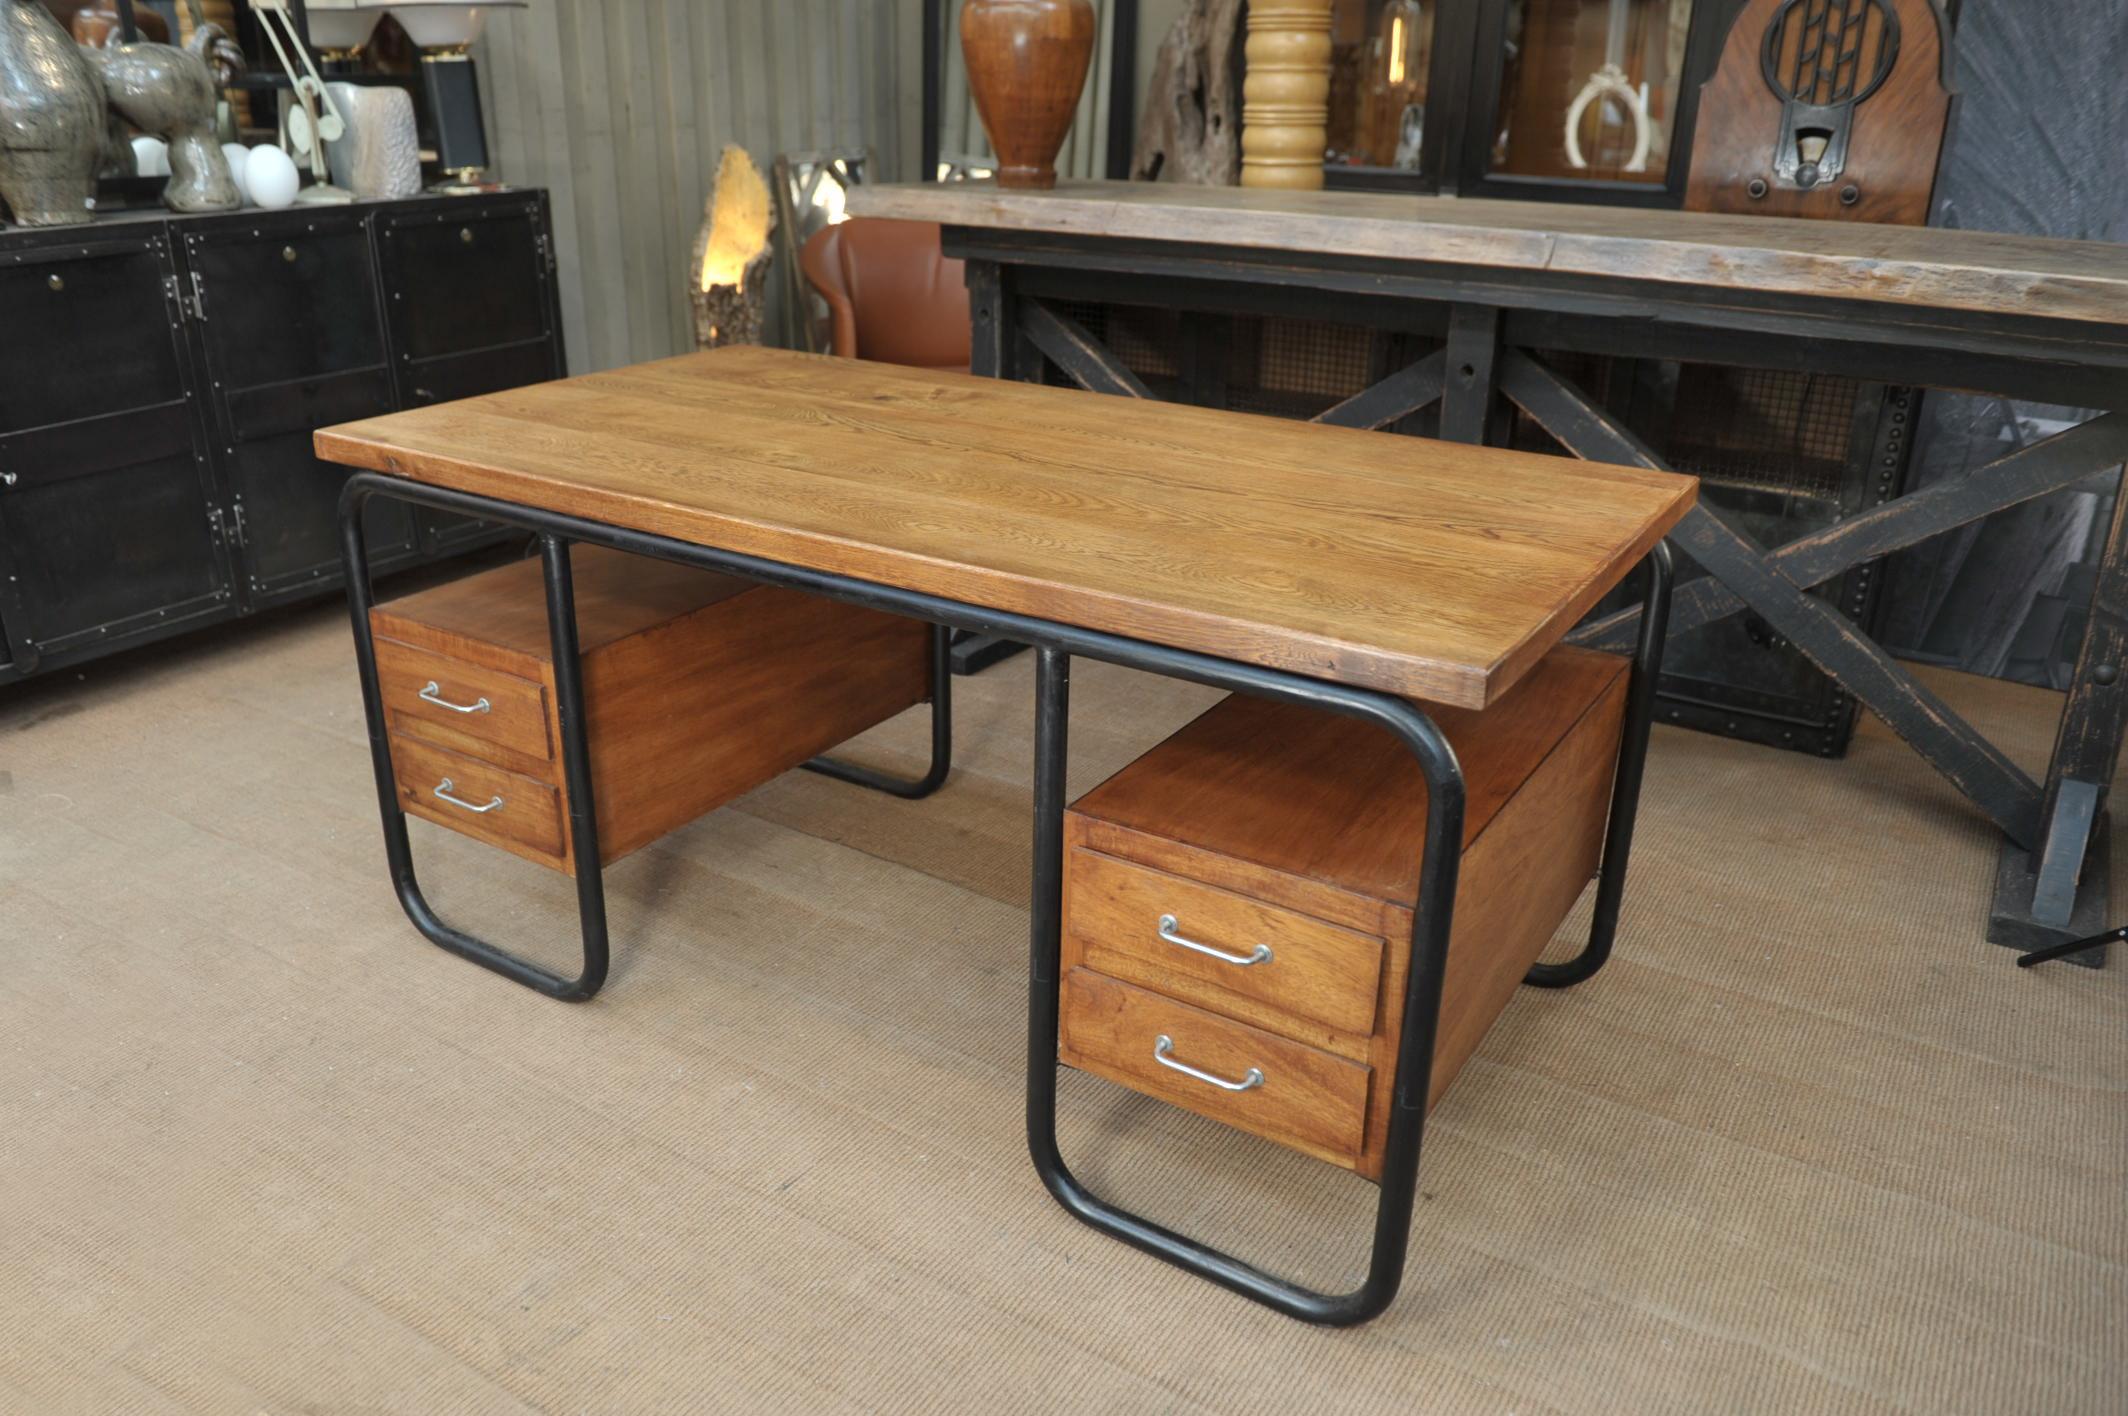 Iron structure with 4 drawers in plywood and solid oak top desk, France, Circa 1950.